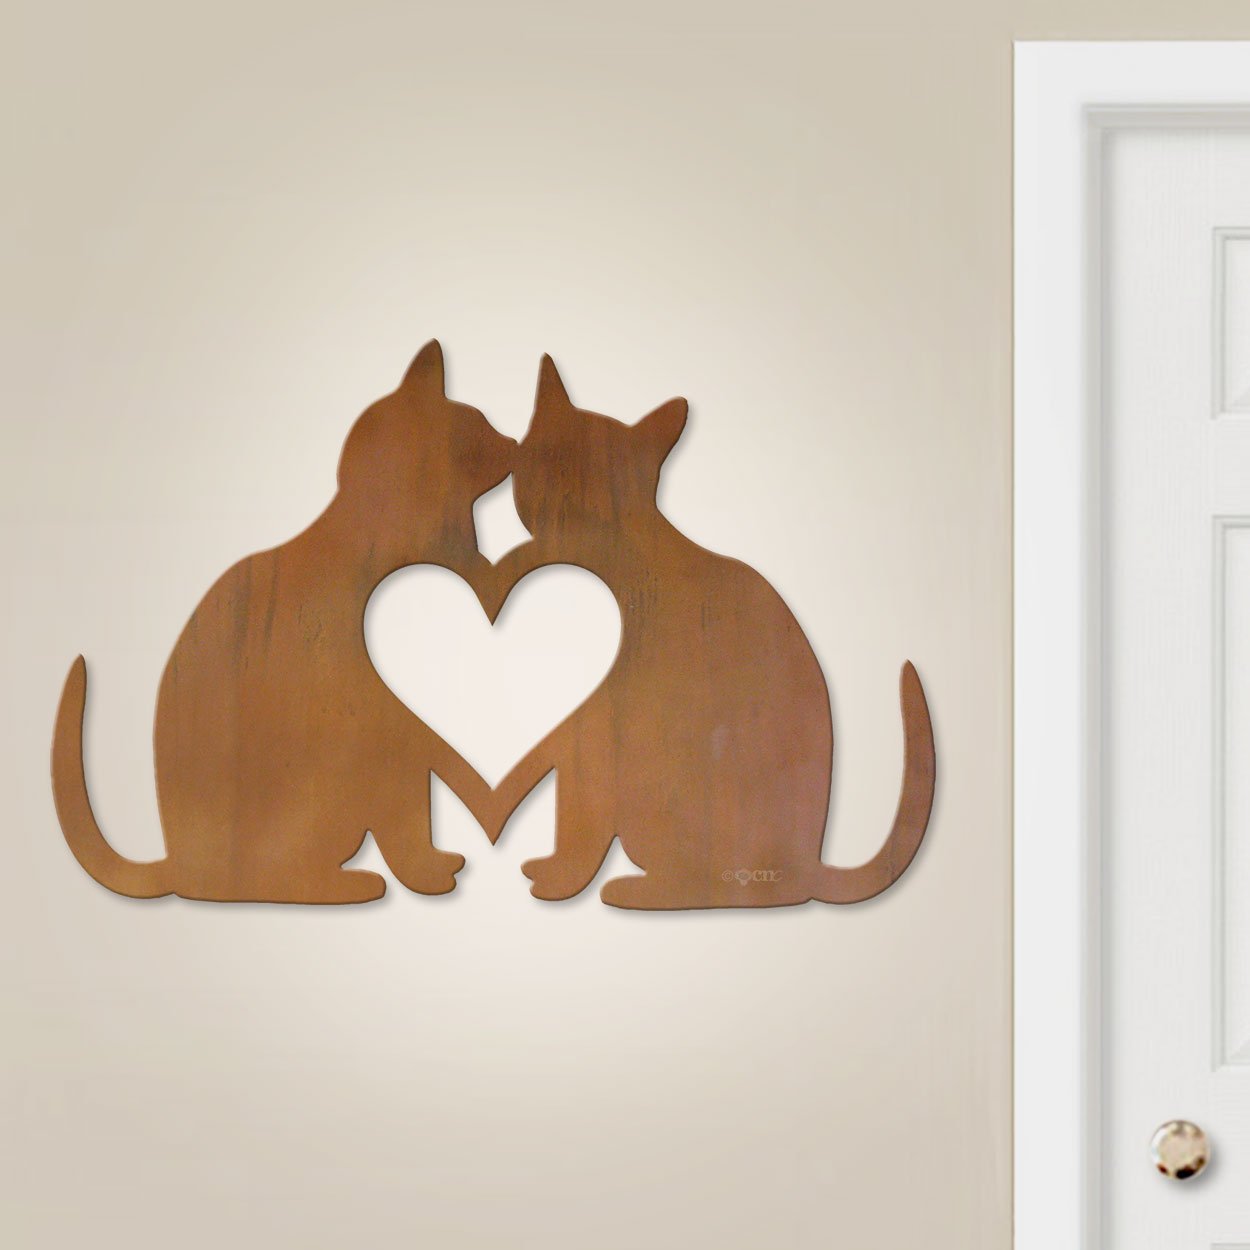 601007 - 36in Cats in Love Large Metal Wall Art